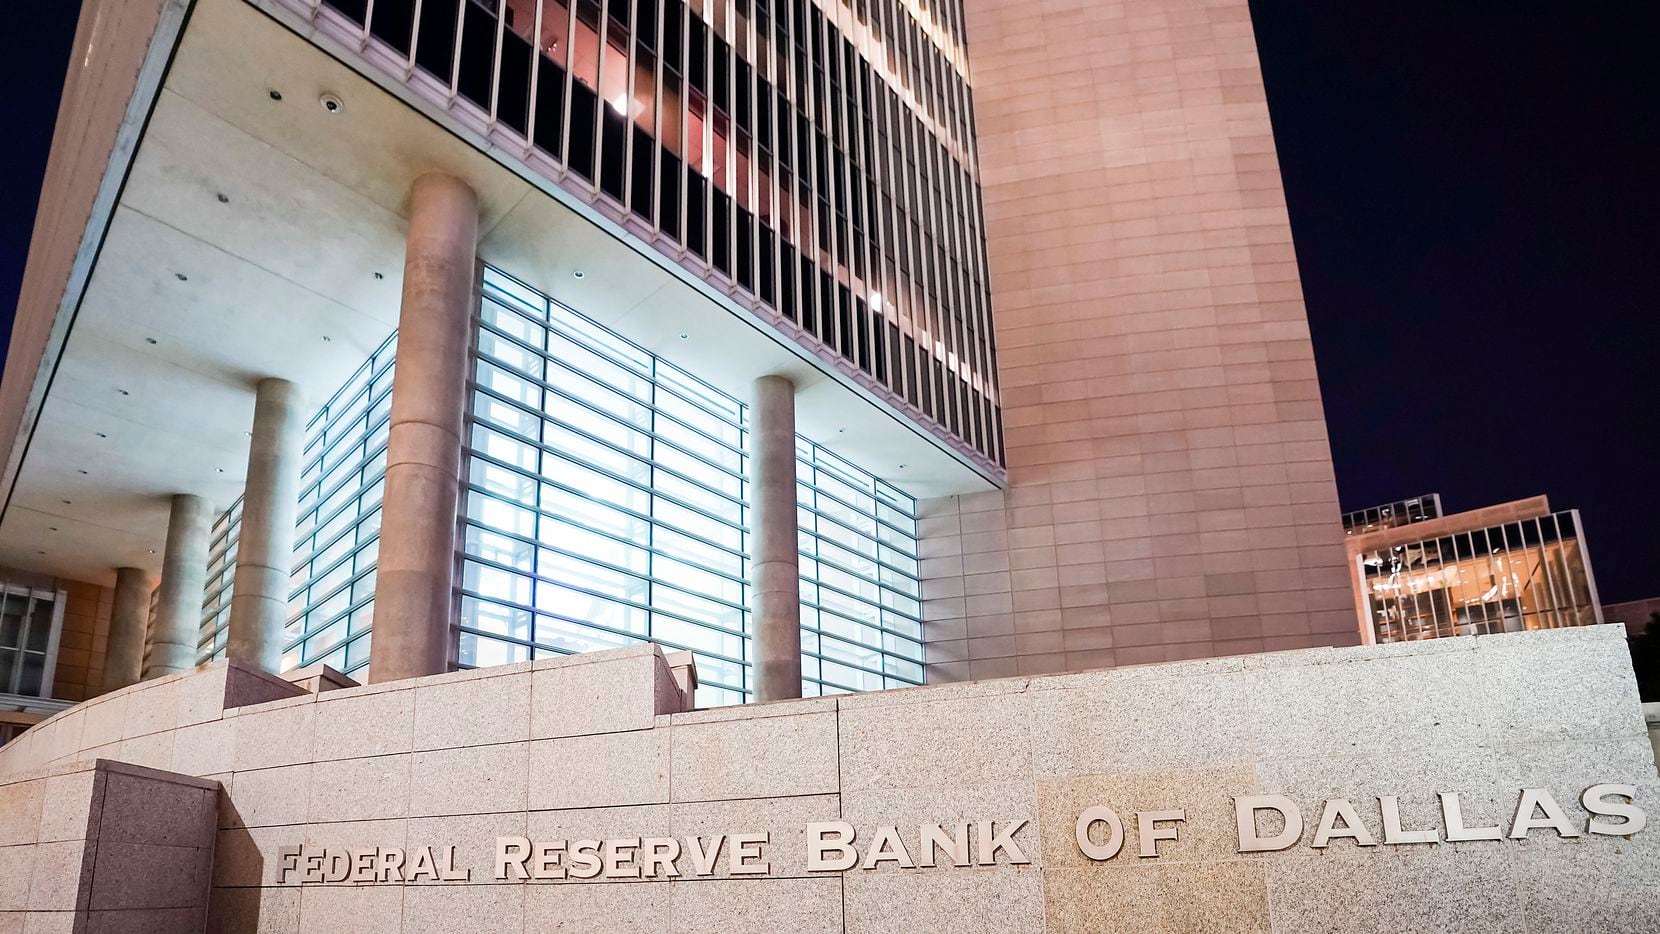 The Federal Reserve Bank of Dallas conducted a survey that showed Texas firms were better prepared for the Delta surge than previous surges of the COVID-19 virus.